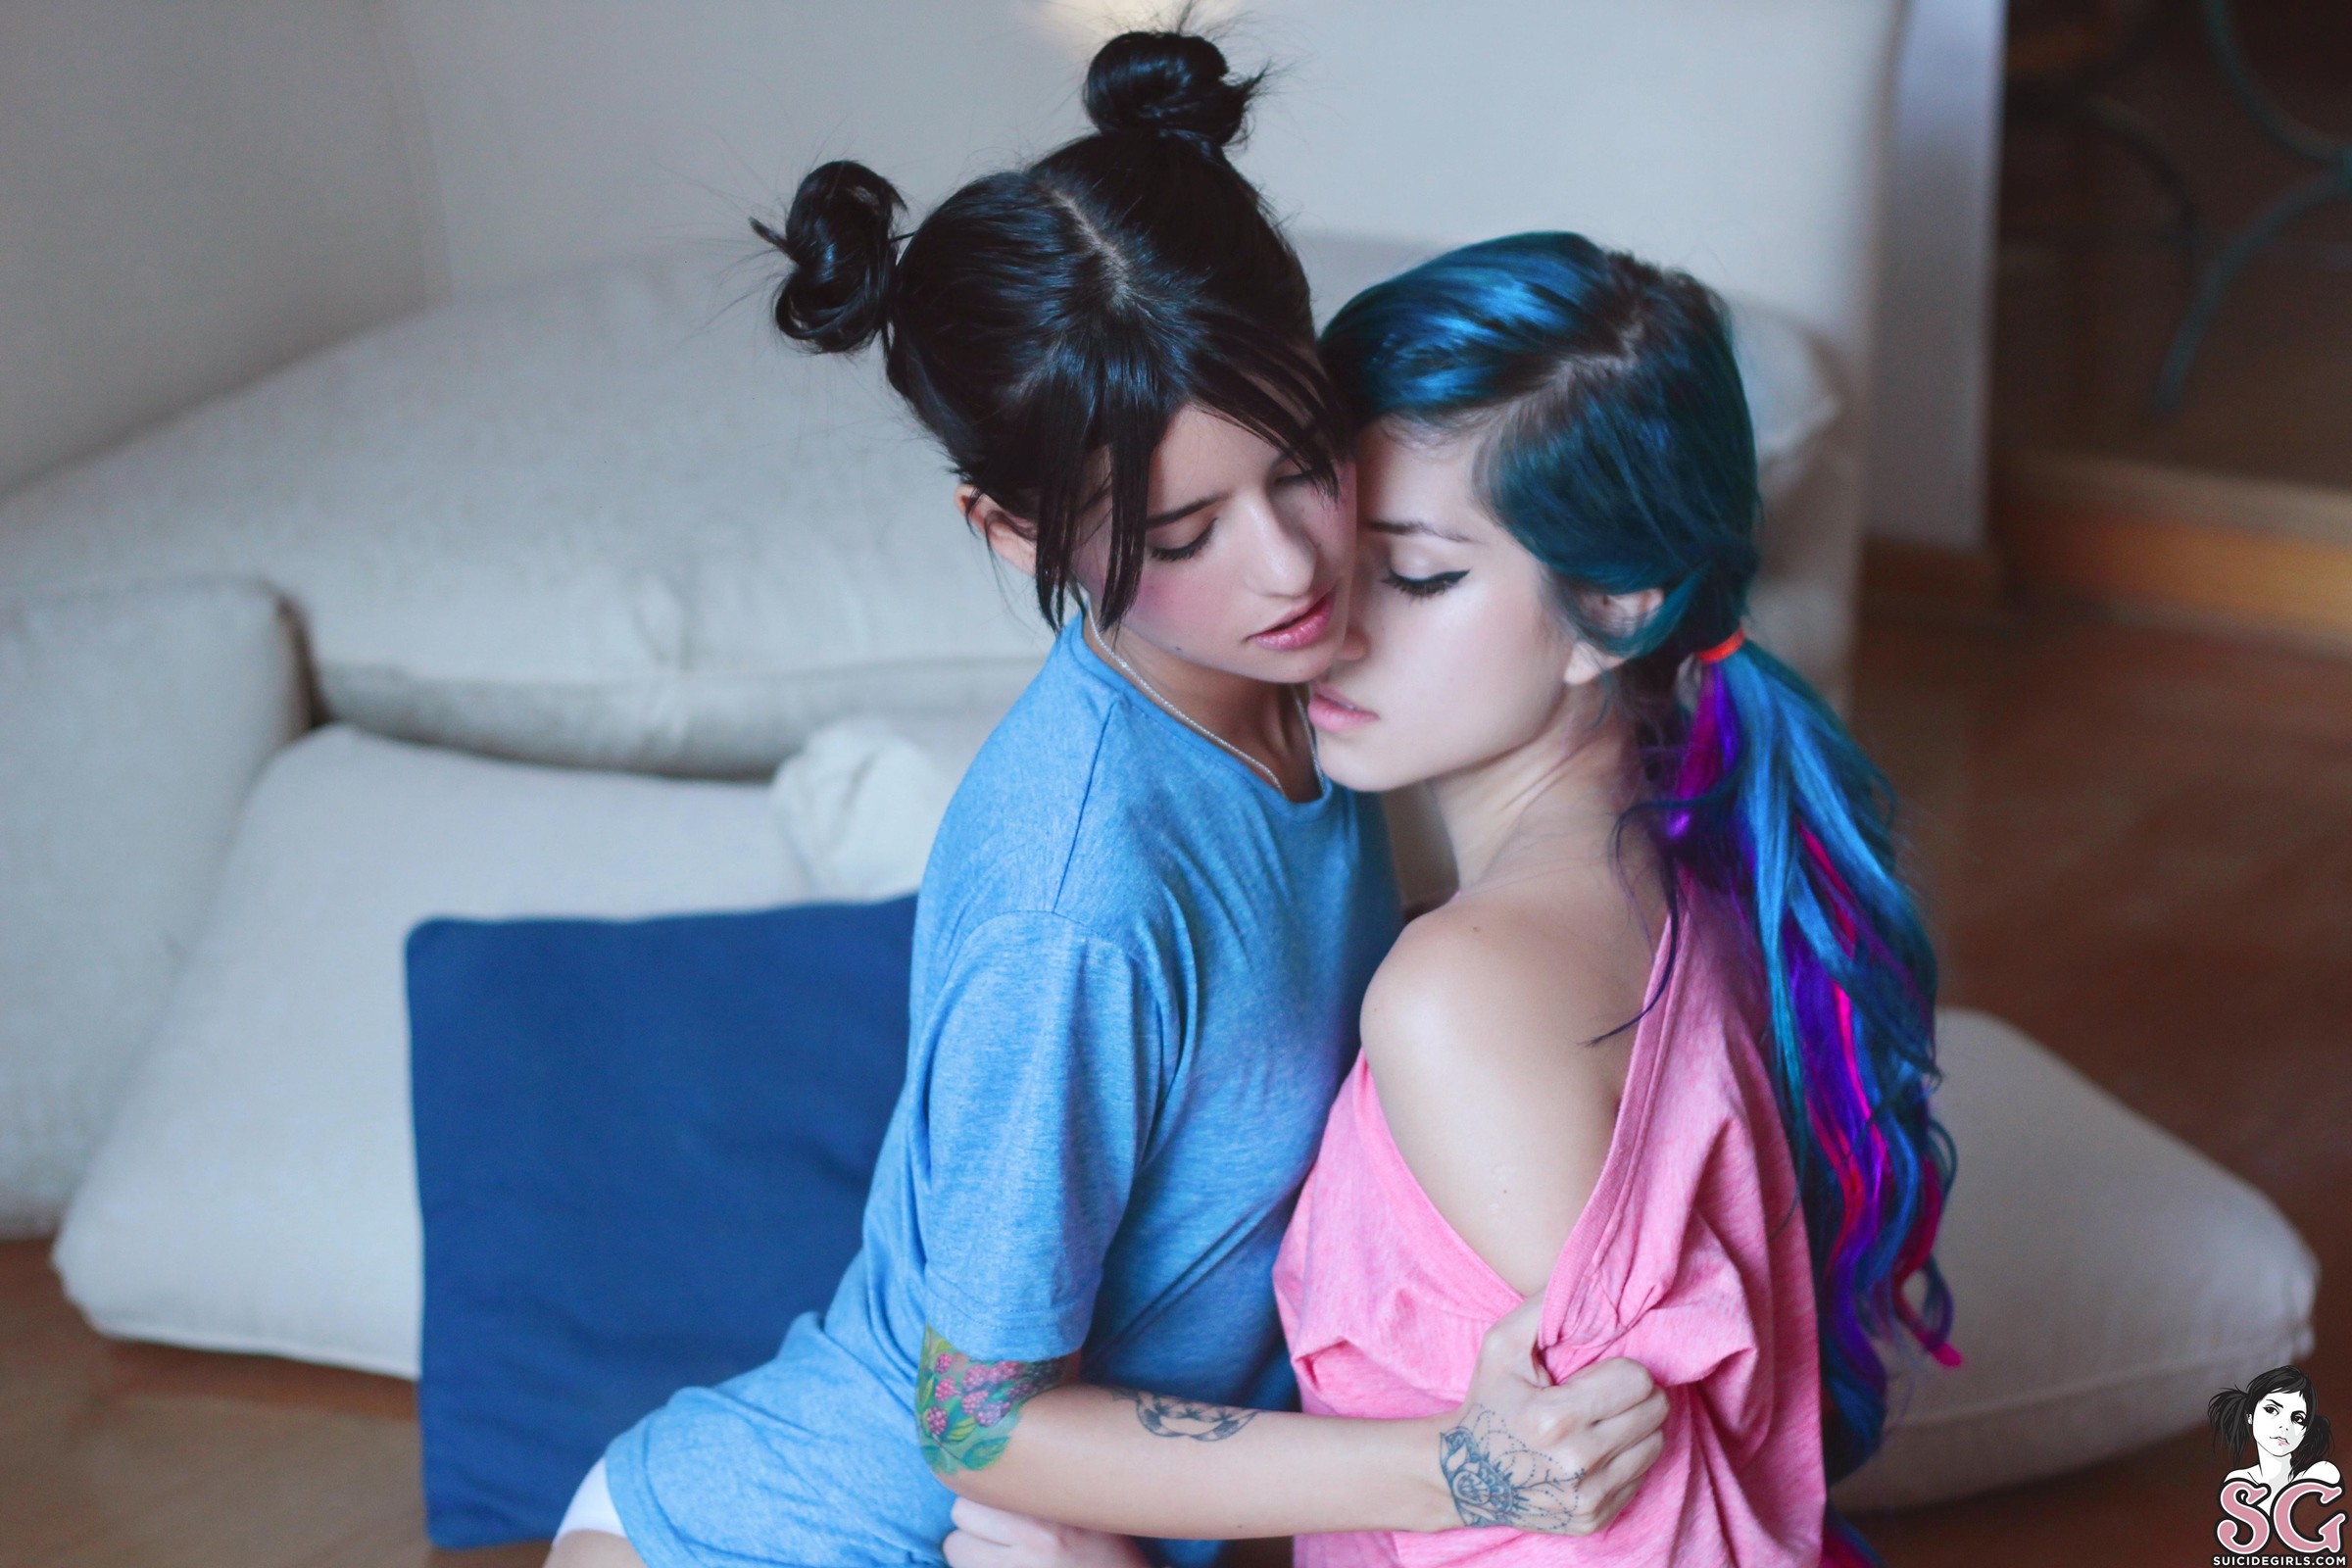 People 2400x1600 Suicide Girls Ness Suicide Fay Suicide blue hair women lesbians T-shirt Chilean women women indoors indoors two women multi-colored hair black hair inked girls watermarked model tattoo